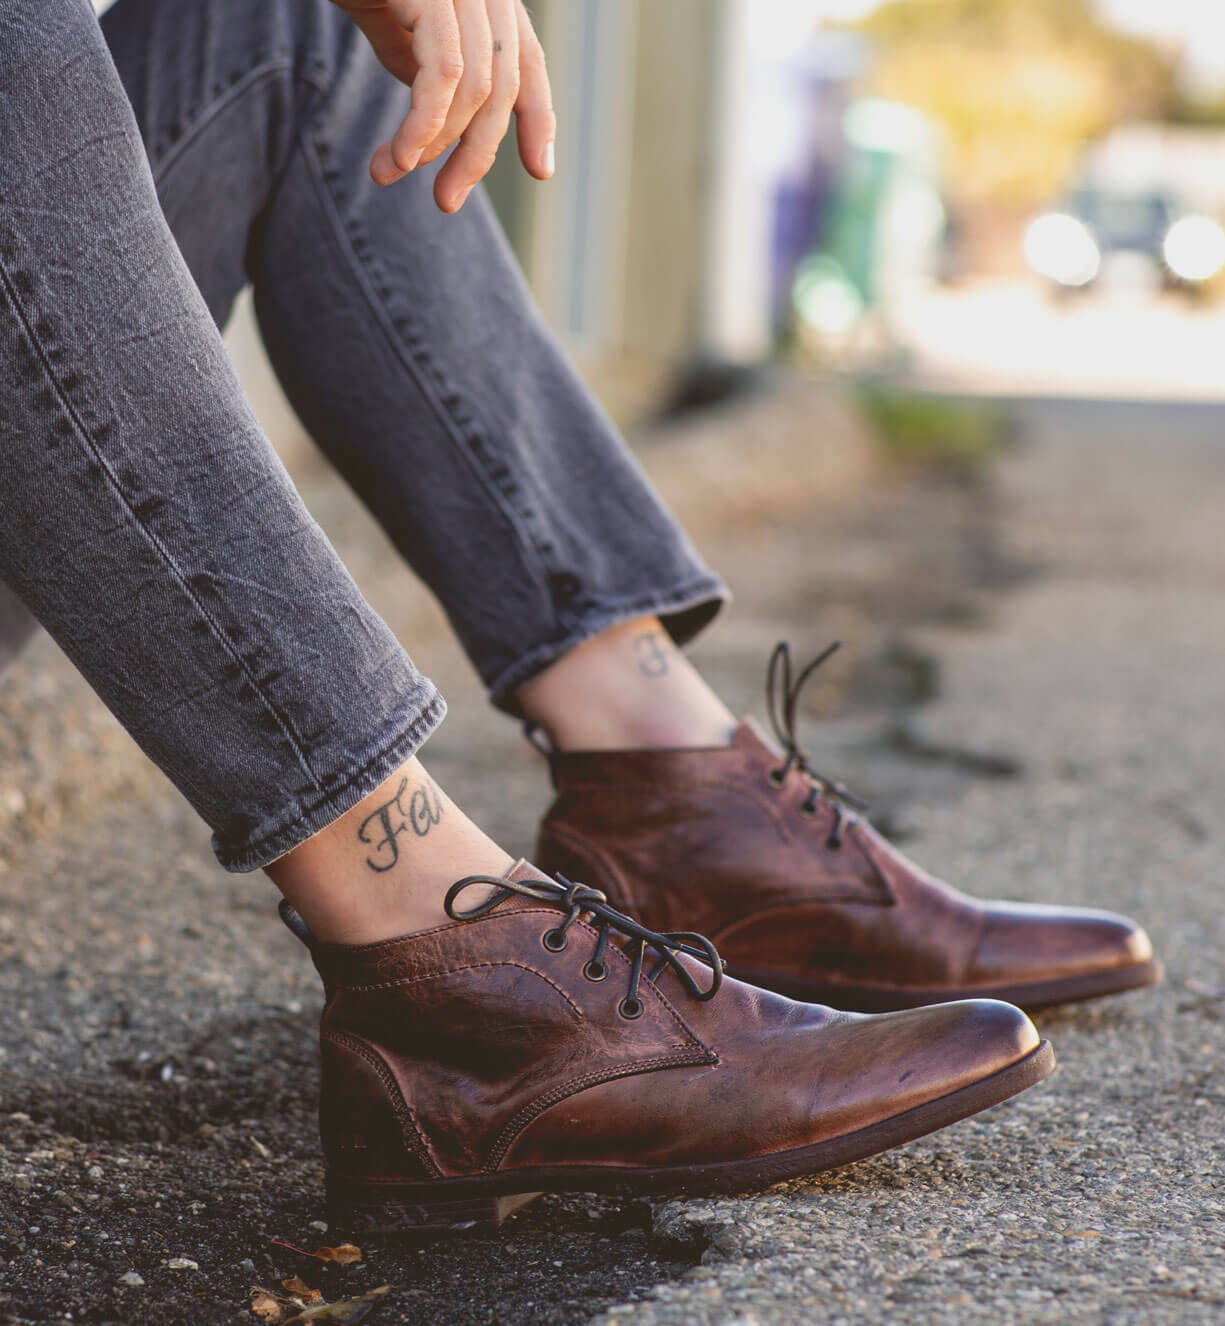 A person wearing Bed Stu Illiad Teak Rustic Boots and gray jeans sitting with one foot on the ground and one bent at the knee, showcasing a tattoo on their ankle.